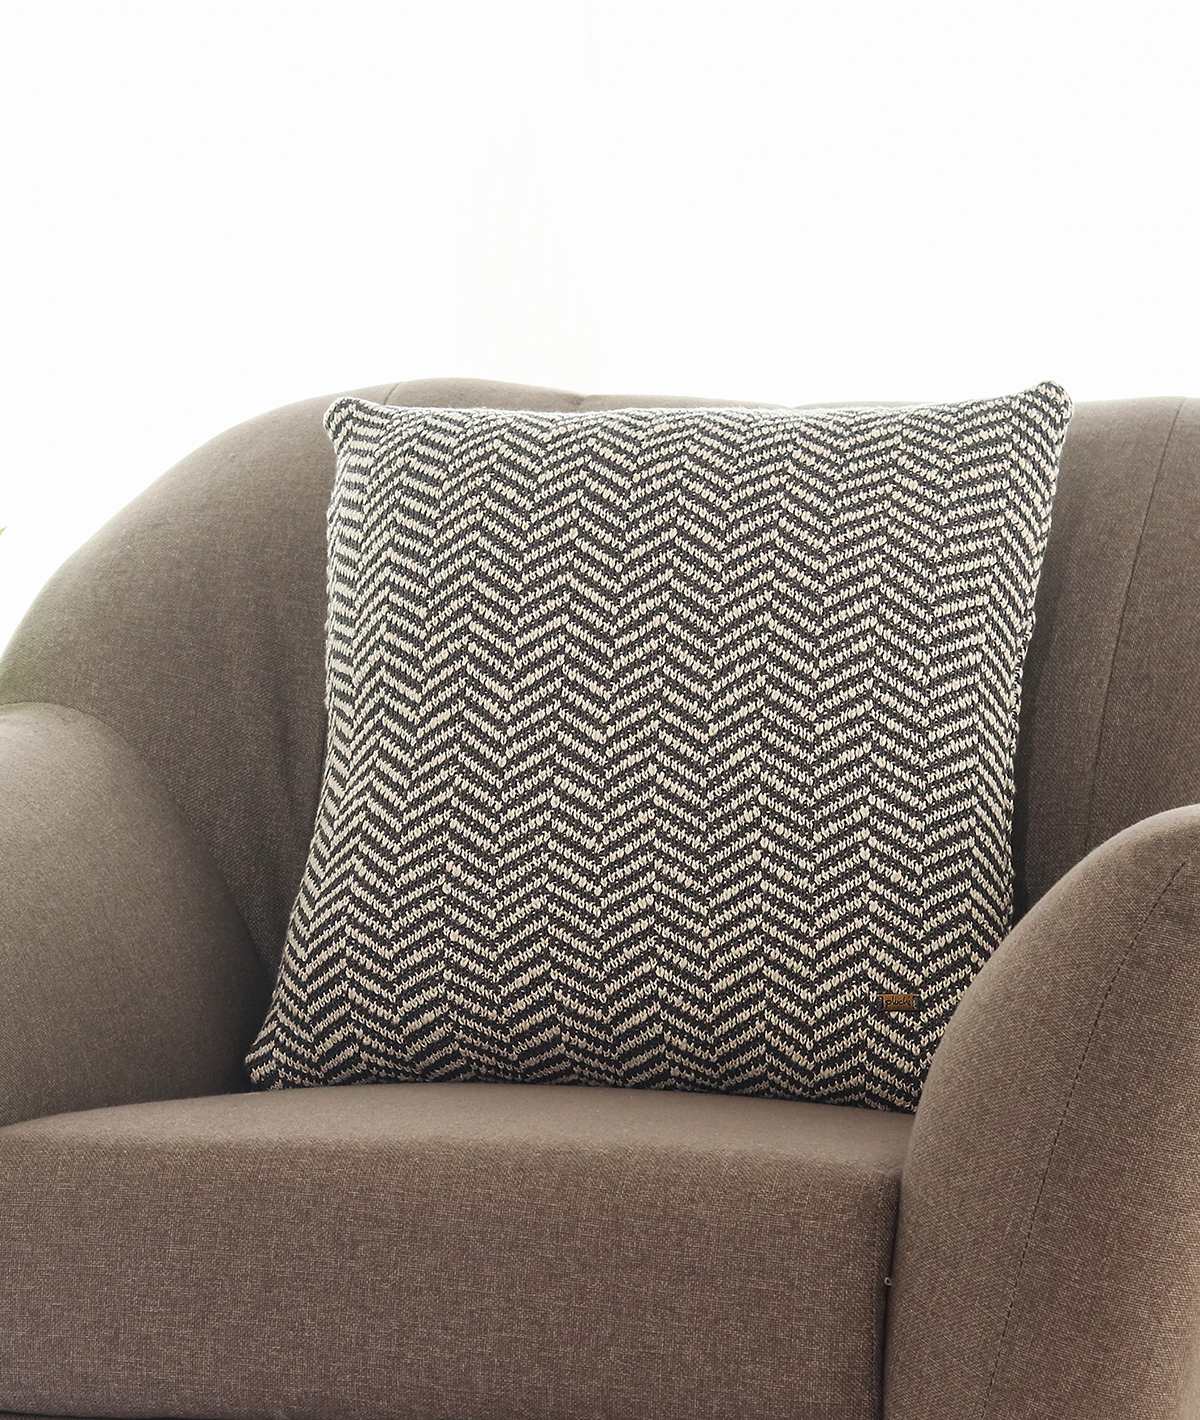 Herringbone Cotton Knitted Decorative Antique Grey & Natural Color 18 x 18 Inches Cushion Cover